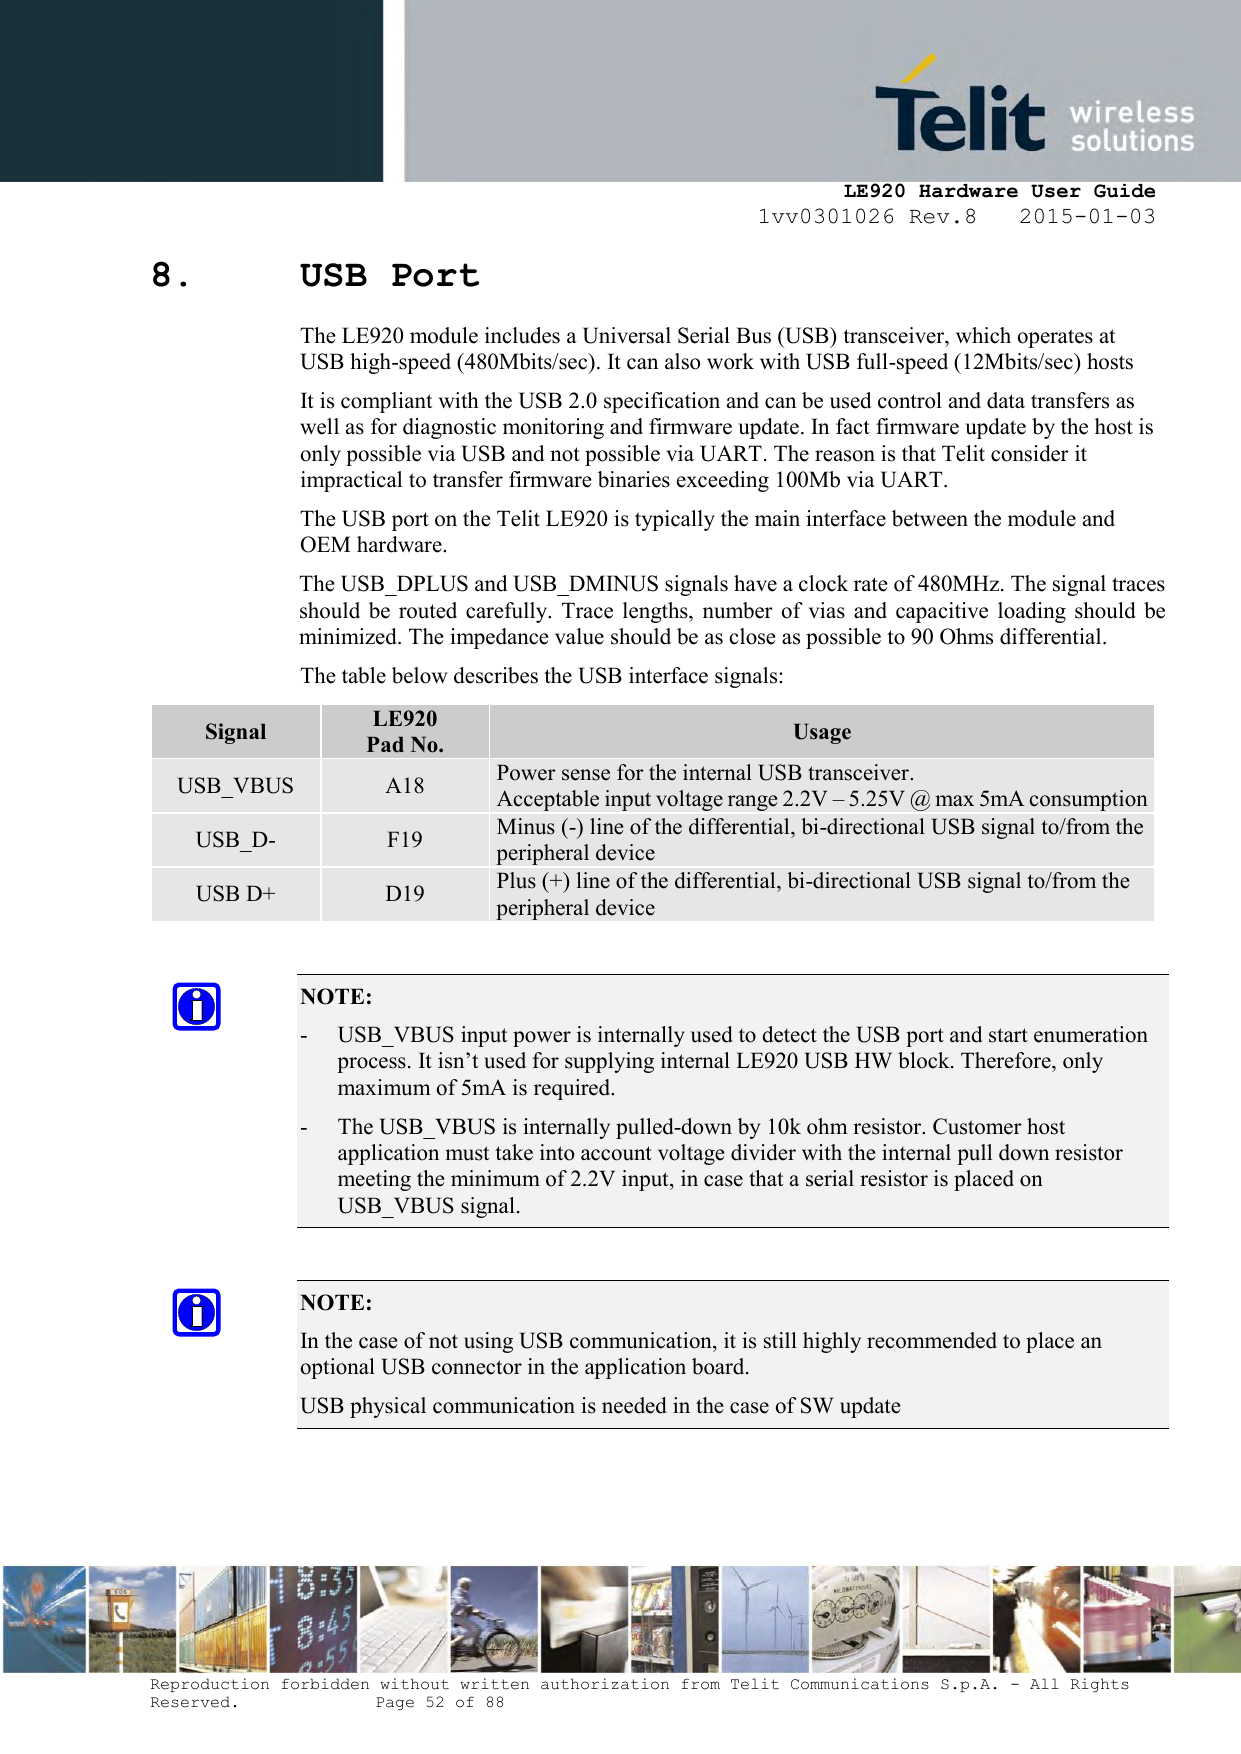     LE920 Hardware User Guide 1vv0301026 Rev.8   2015-01-03 Reproduction forbidden without written authorization from Telit Communications S.p.A. - All Rights Reserved.    Page 52 of 88  8. USB Port The LE920 module includes a Universal Serial Bus (USB) transceiver, which operates at USB high-speed (480Mbits/sec). It can also work with USB full-speed (12Mbits/sec) hosts It is compliant with the USB 2.0 specification and can be used control and data transfers as well as for diagnostic monitoring and firmware update. In fact firmware update by the host is only possible via USB and not possible via UART. The reason is that Telit consider it impractical to transfer firmware binaries exceeding 100Mb via UART. The USB port on the Telit LE920 is typically the main interface between the module and OEM hardware. The USB_DPLUS and USB_DMINUS signals have a clock rate of 480MHz. The signal traces should  be  routed carefully. Trace lengths, number of  vias  and  capacitive loading should  be minimized. The impedance value should be as close as possible to 90 Ohms differential. The table below describes the USB interface signals:  NOTE:  - USB_VBUS input power is internally used to detect the USB port and start enumeration process. It isn’t used for supplying internal LE920 USB HW block. Therefore, only maximum of 5mA is required. - The USB_VBUS is internally pulled-down by 10k ohm resistor. Customer host application must take into account voltage divider with the internal pull down resistor meeting the minimum of 2.2V input, in case that a serial resistor is placed on USB_VBUS signal.   NOTE:  In the case of not using USB communication, it is still highly recommended to place an optional USB connector in the application board. USB physical communication is needed in the case of SW update  Signal LE920 Pad No. Usage USB_VBUS A18 Power sense for the internal USB transceiver.  Acceptable input voltage range 2.2V – 5.25V @ max 5mA consumption USB_D- F19 Minus (-) line of the differential, bi-directional USB signal to/from the peripheral device USB D+ D19 Plus (+) line of the differential, bi-directional USB signal to/from the peripheral device 